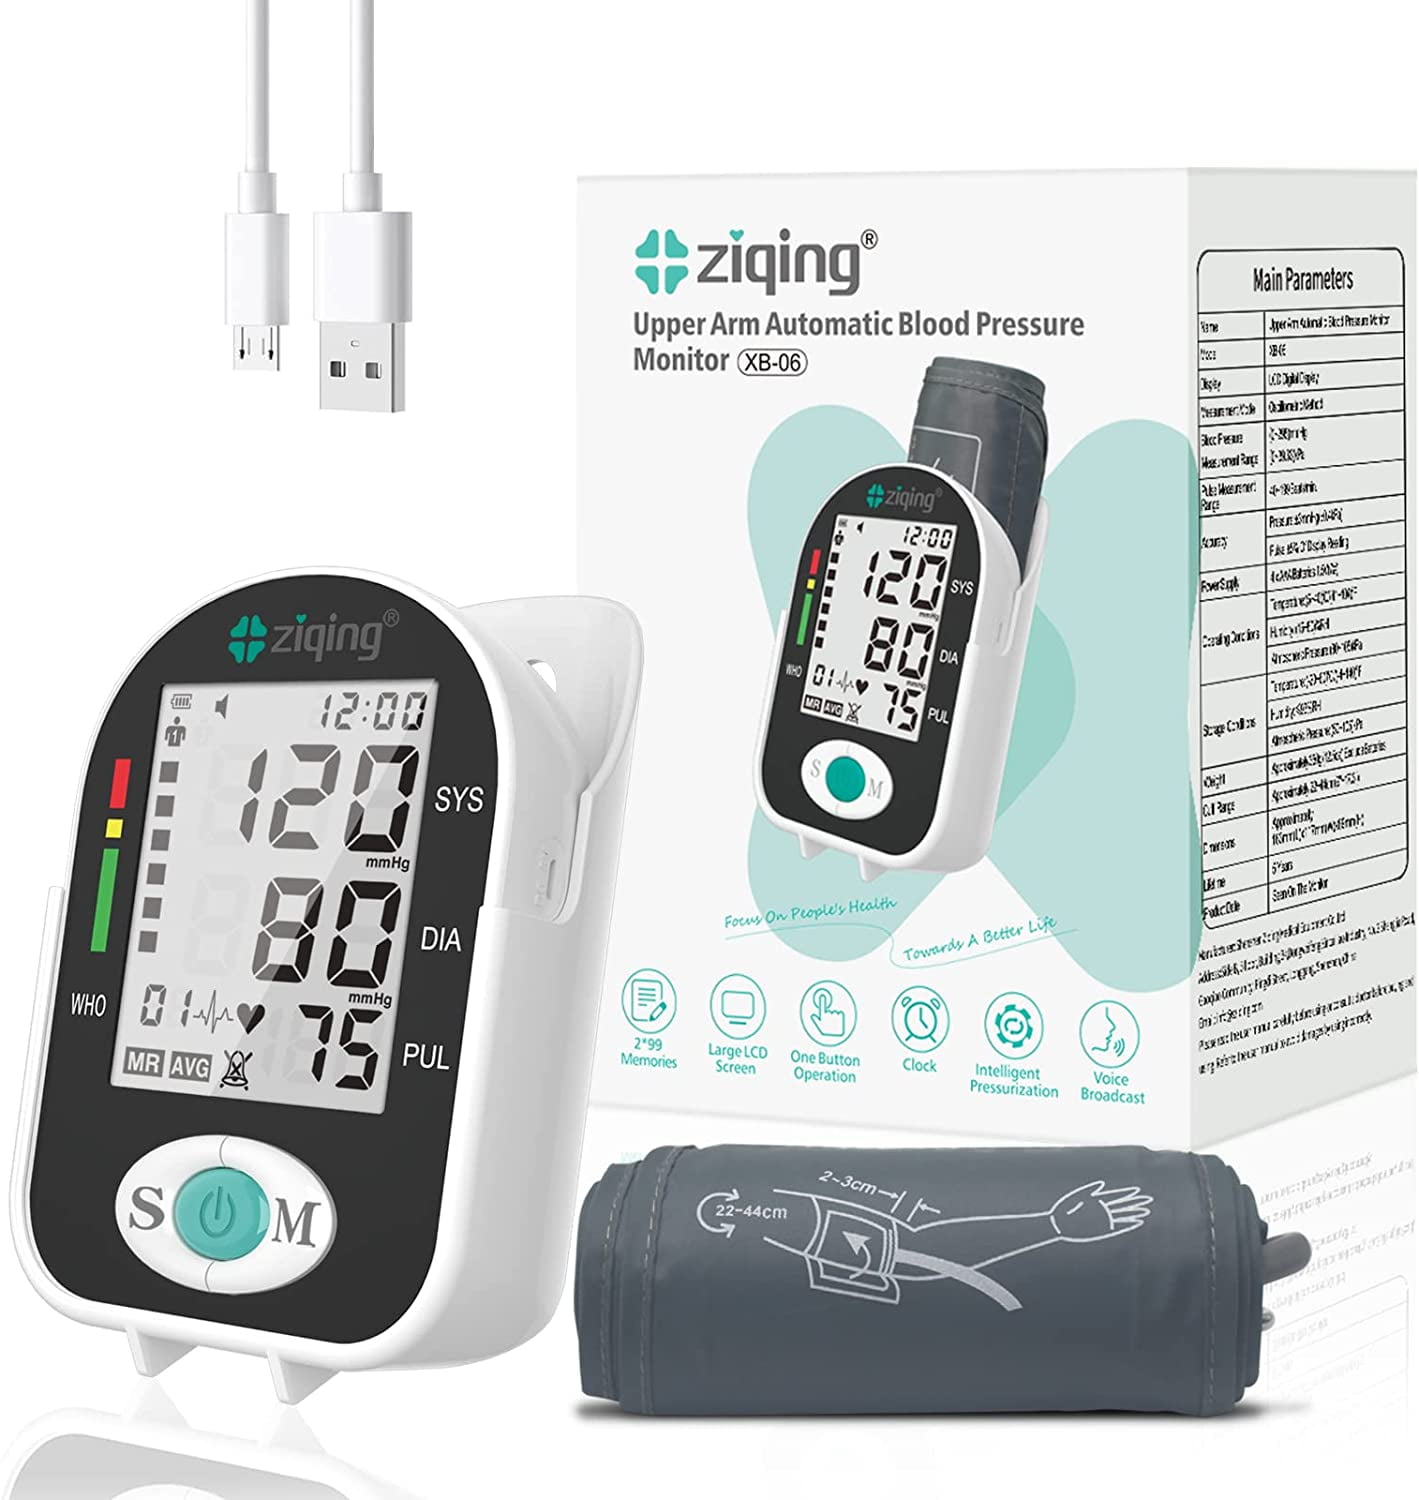 Ziqing Extra Large Cuff (22-44cm) Blood Pressure Monitor Upper Arm BP  Irregular Heart Rate Detector Adult and Kids BPM for Obesity